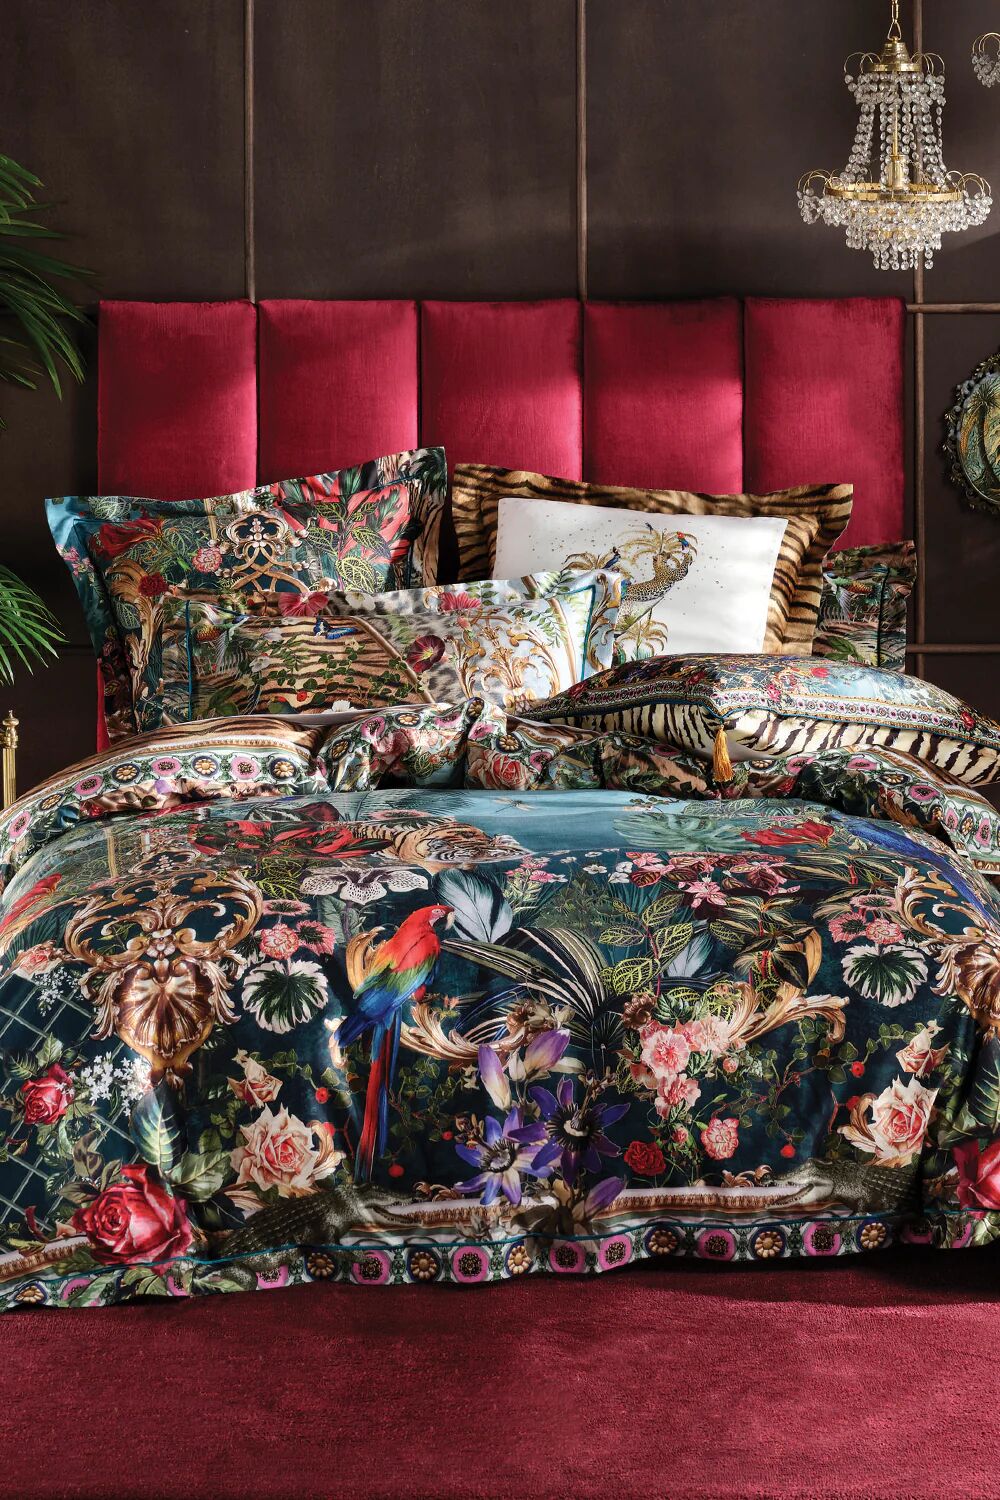 Camilla eBoutique Quilt Cover Set if these Walls Could Talk, QUEEN BED  - Size: QUEEN BED